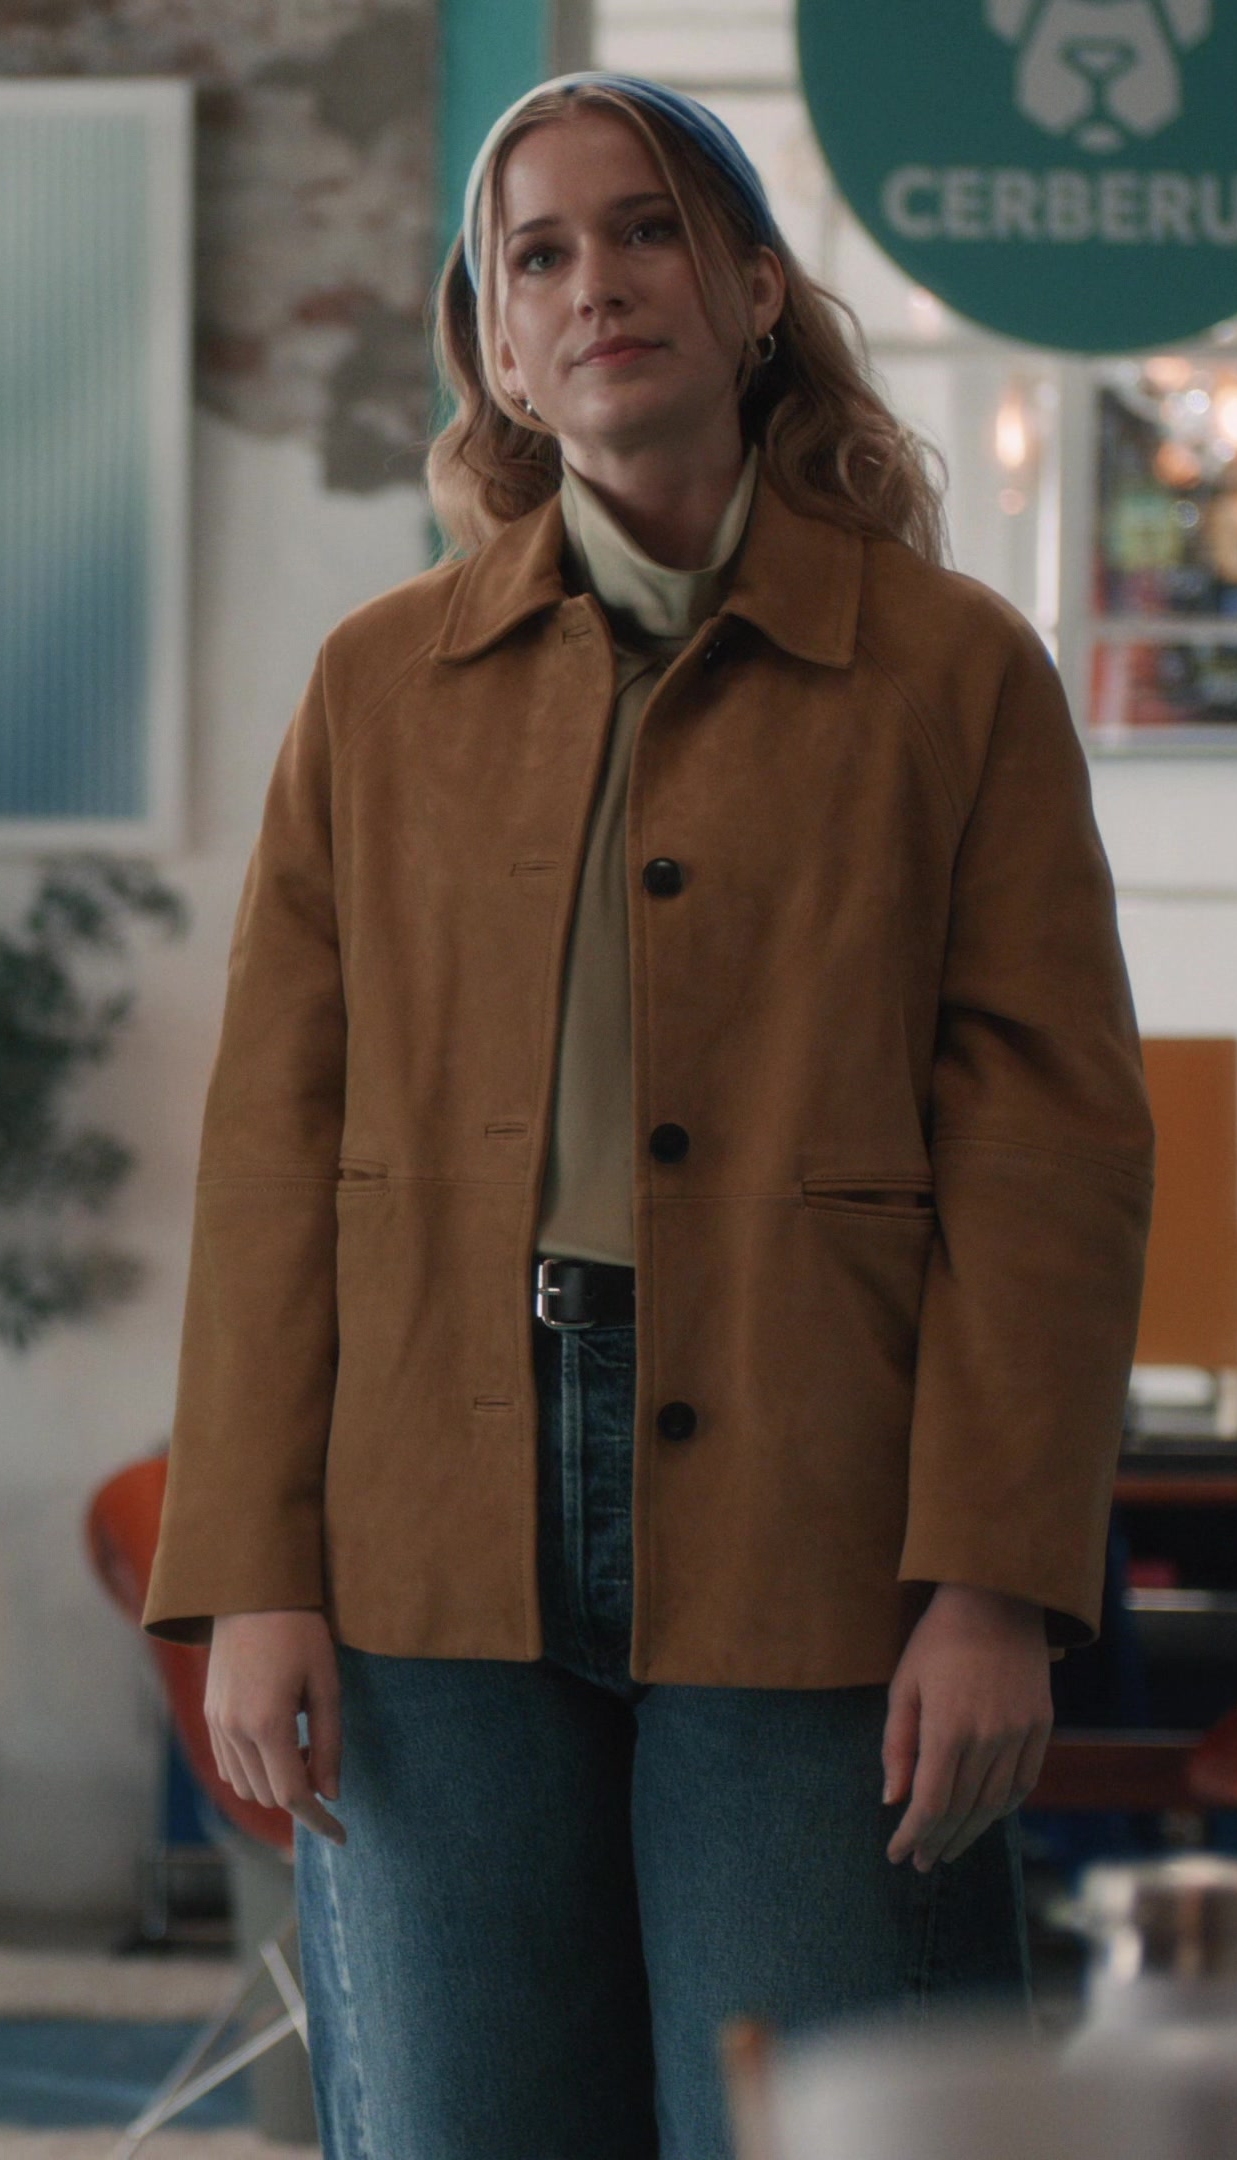 Suede Leather Jacket with Lapel Collar Worn by Elizabeth Lail as Quinn Powers